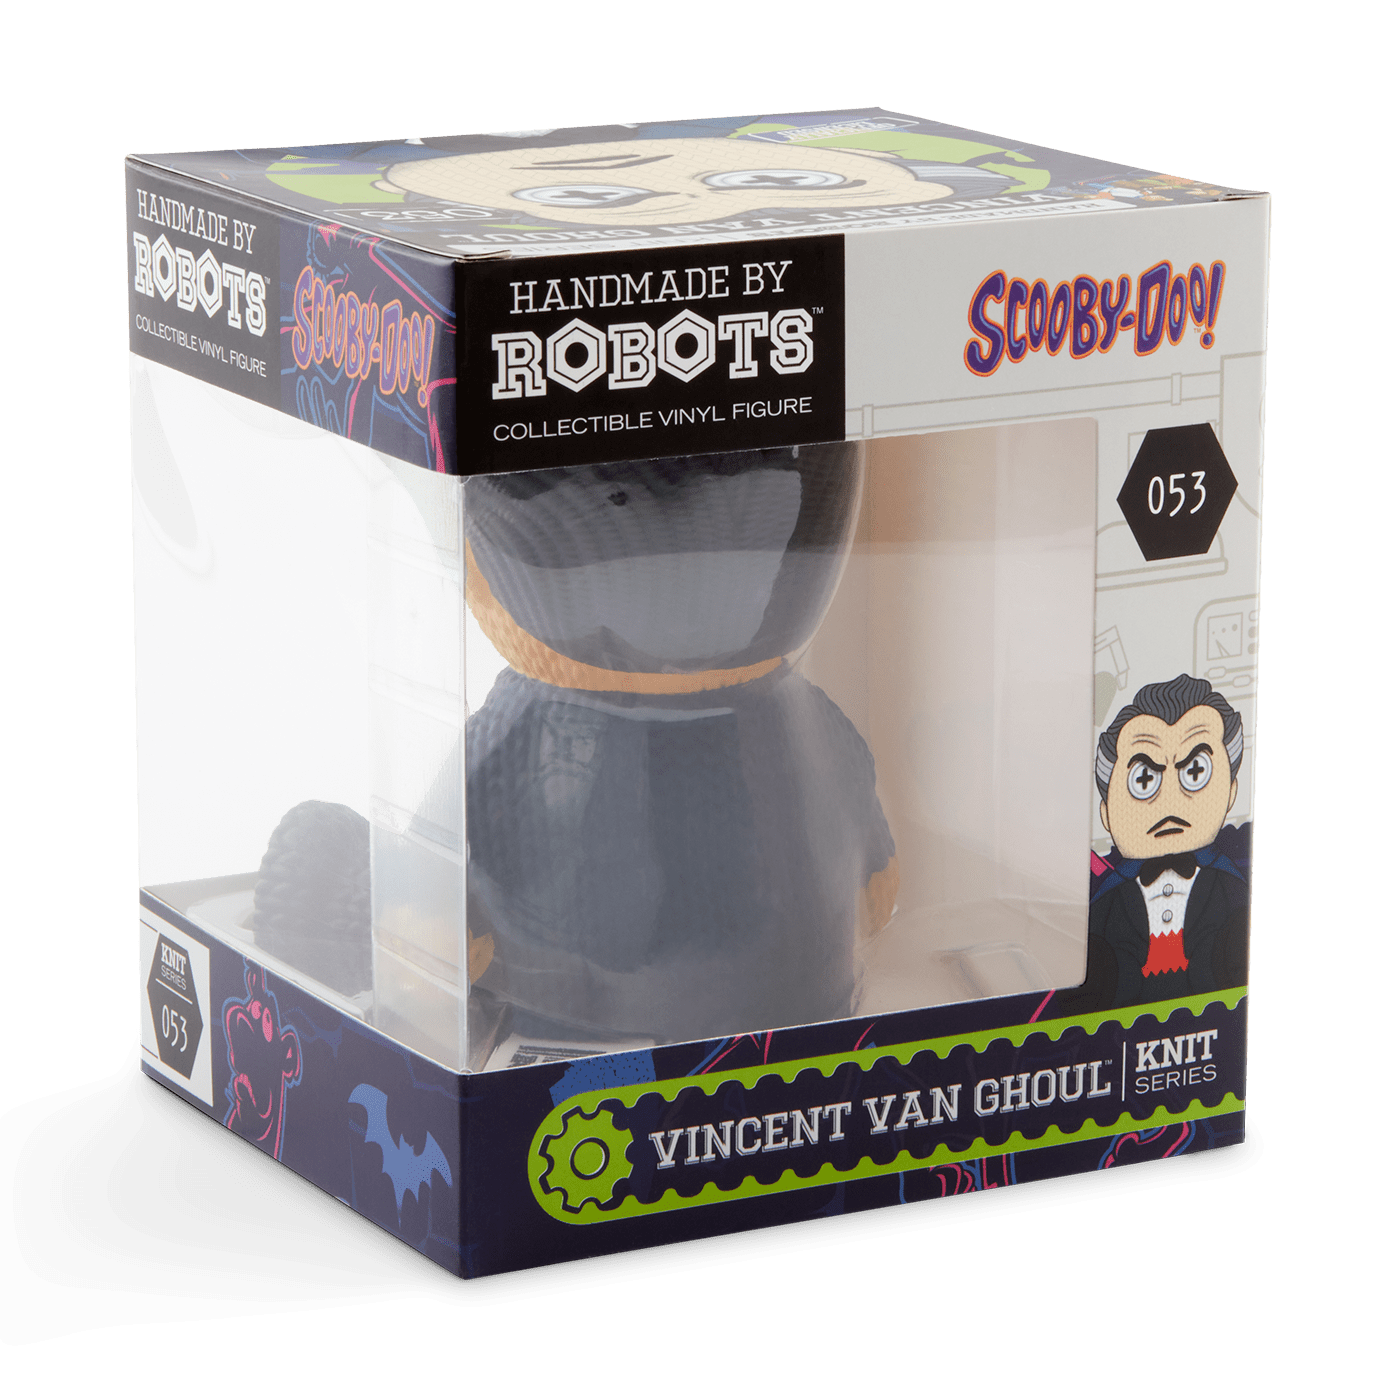 Vincent Van Ghoul #053 - Scooby-Doo - Handmade by Robots - Limited Edition